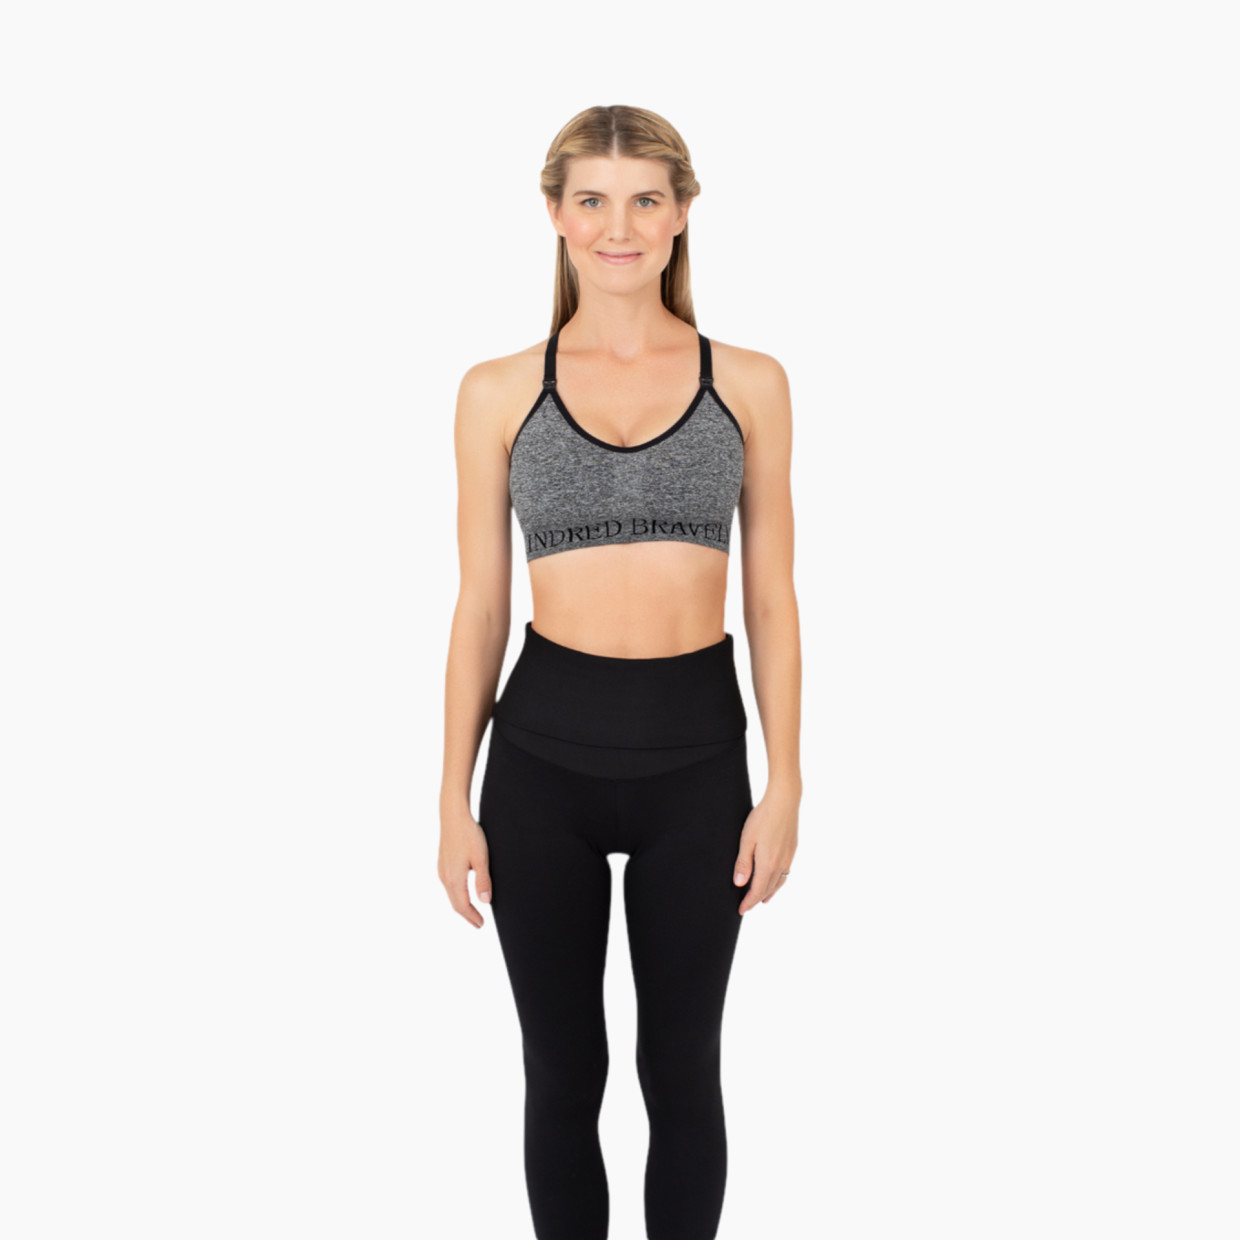 Kindred Bravely Sublime Support Low Impact Nursing & Maternity Sports Bra - Grey Heather, X-Large.